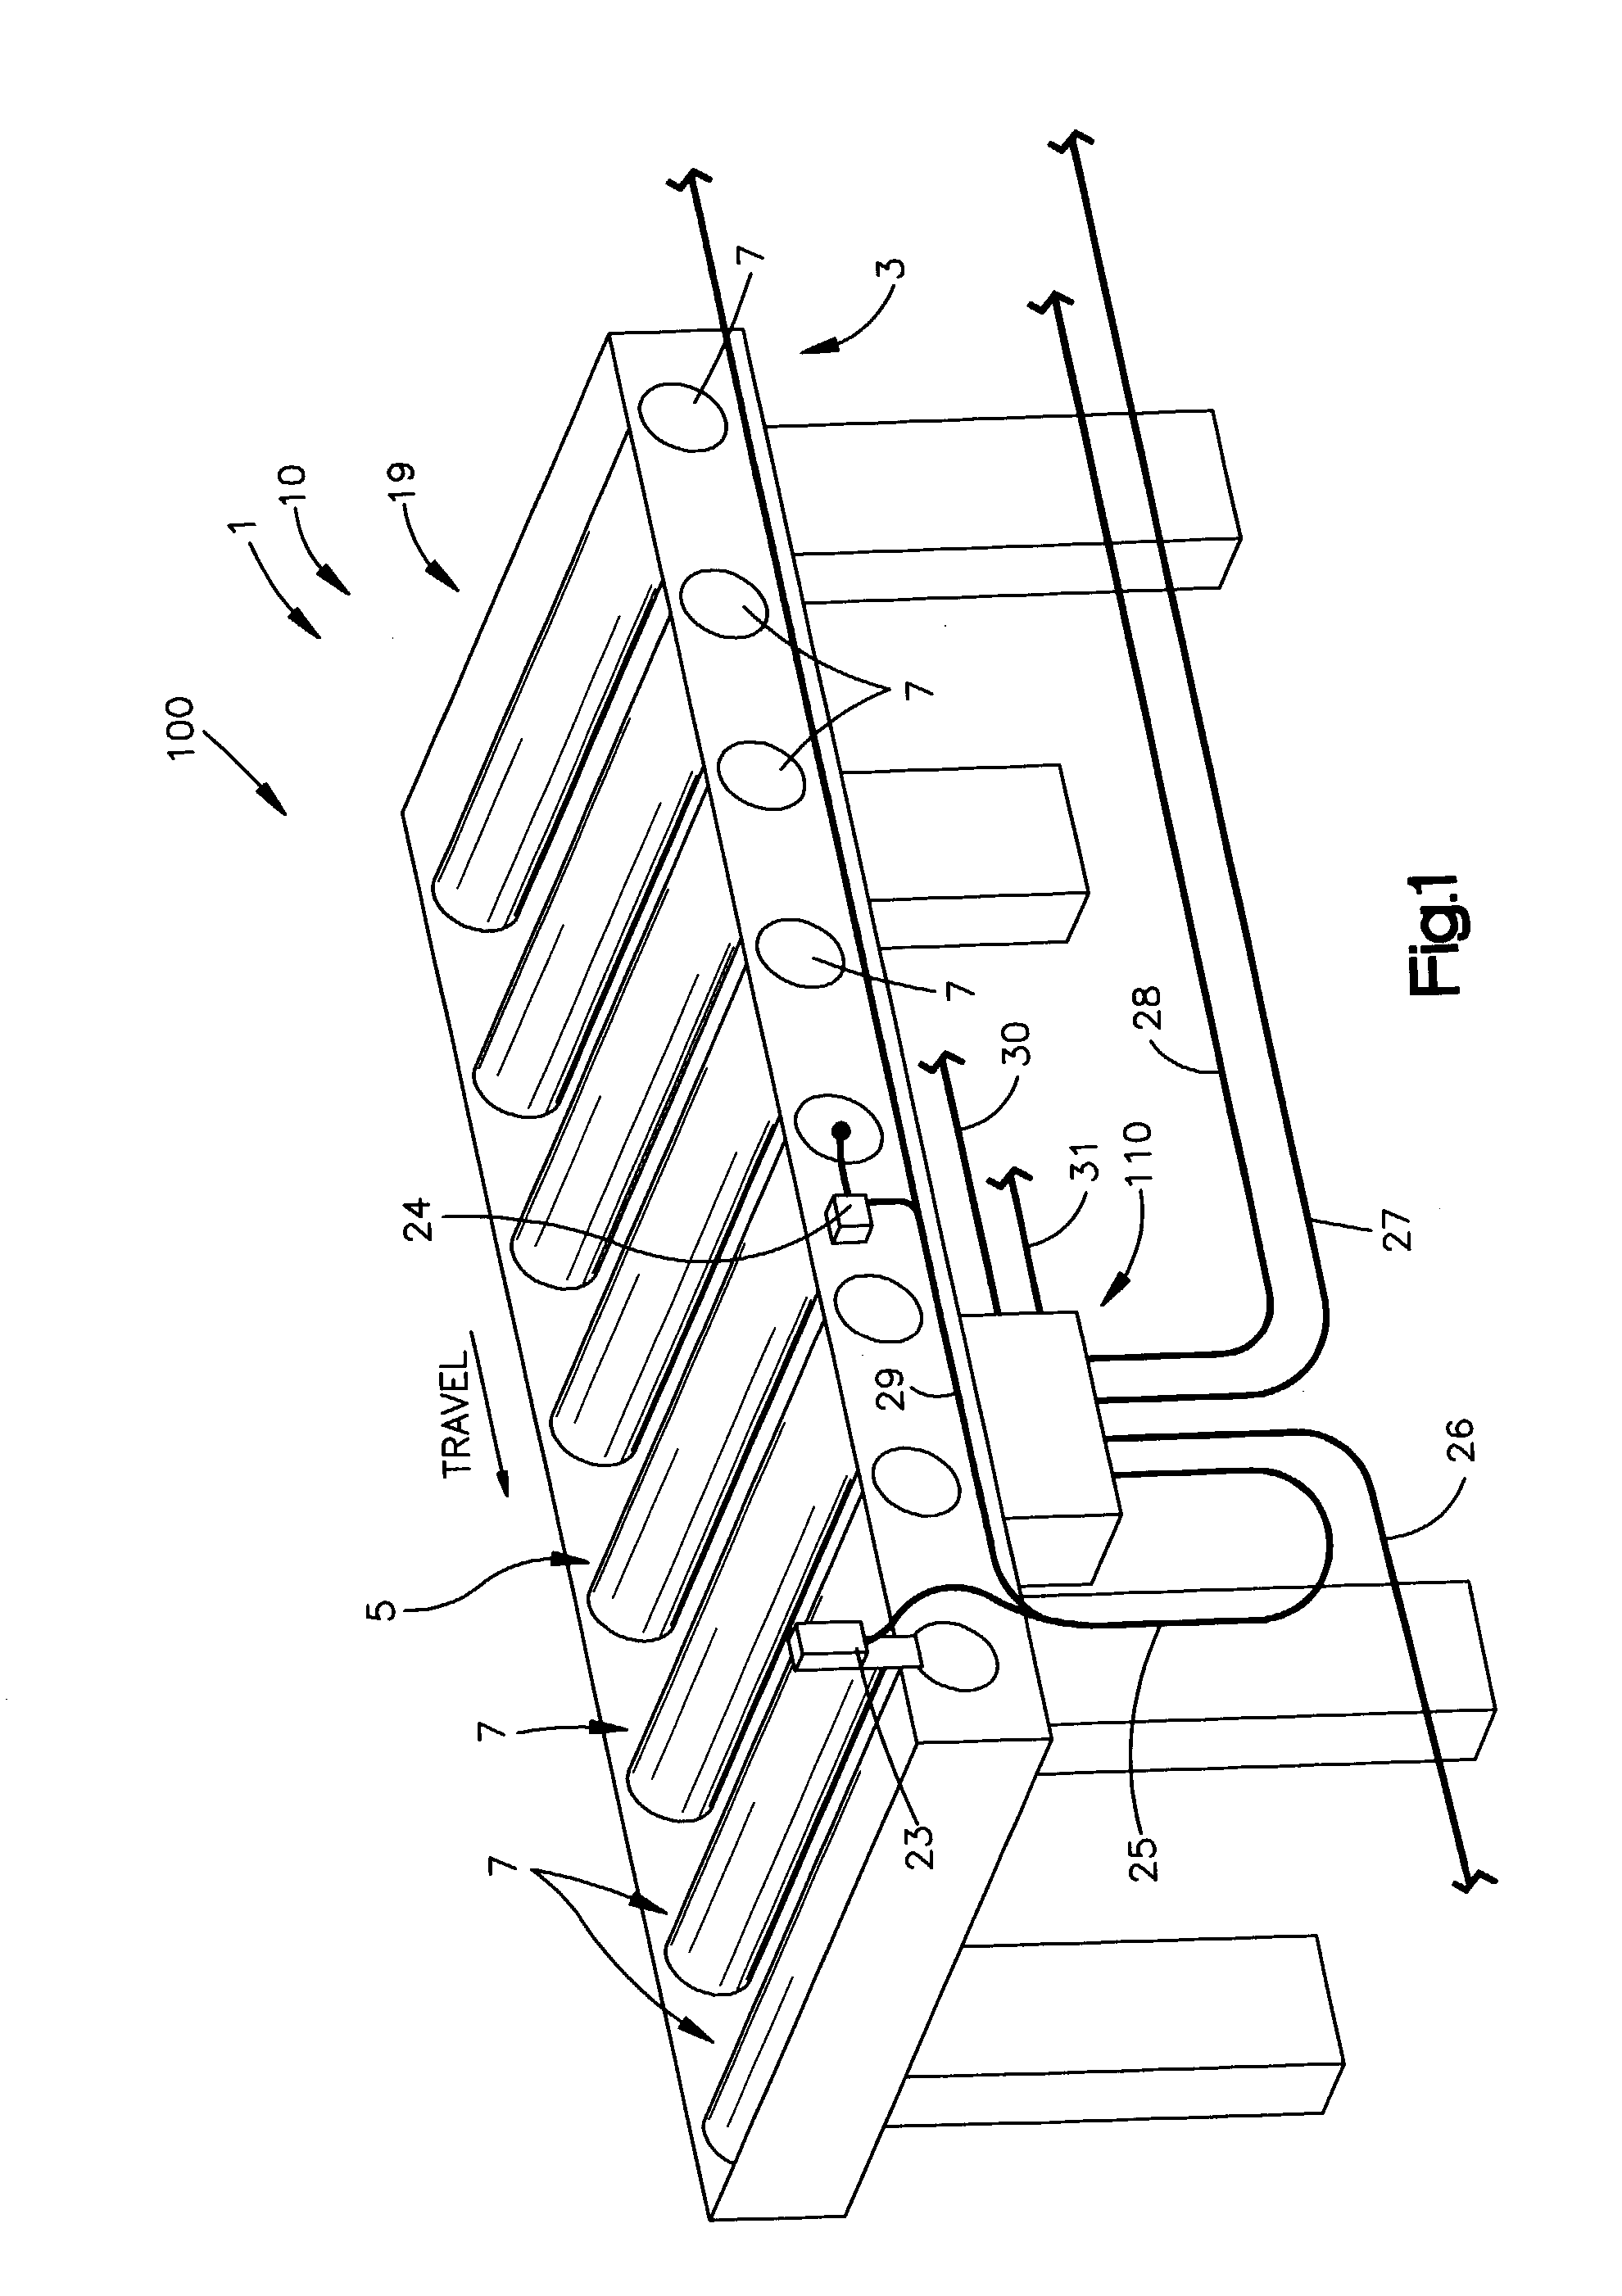 Control and power distribution system for a conveyor